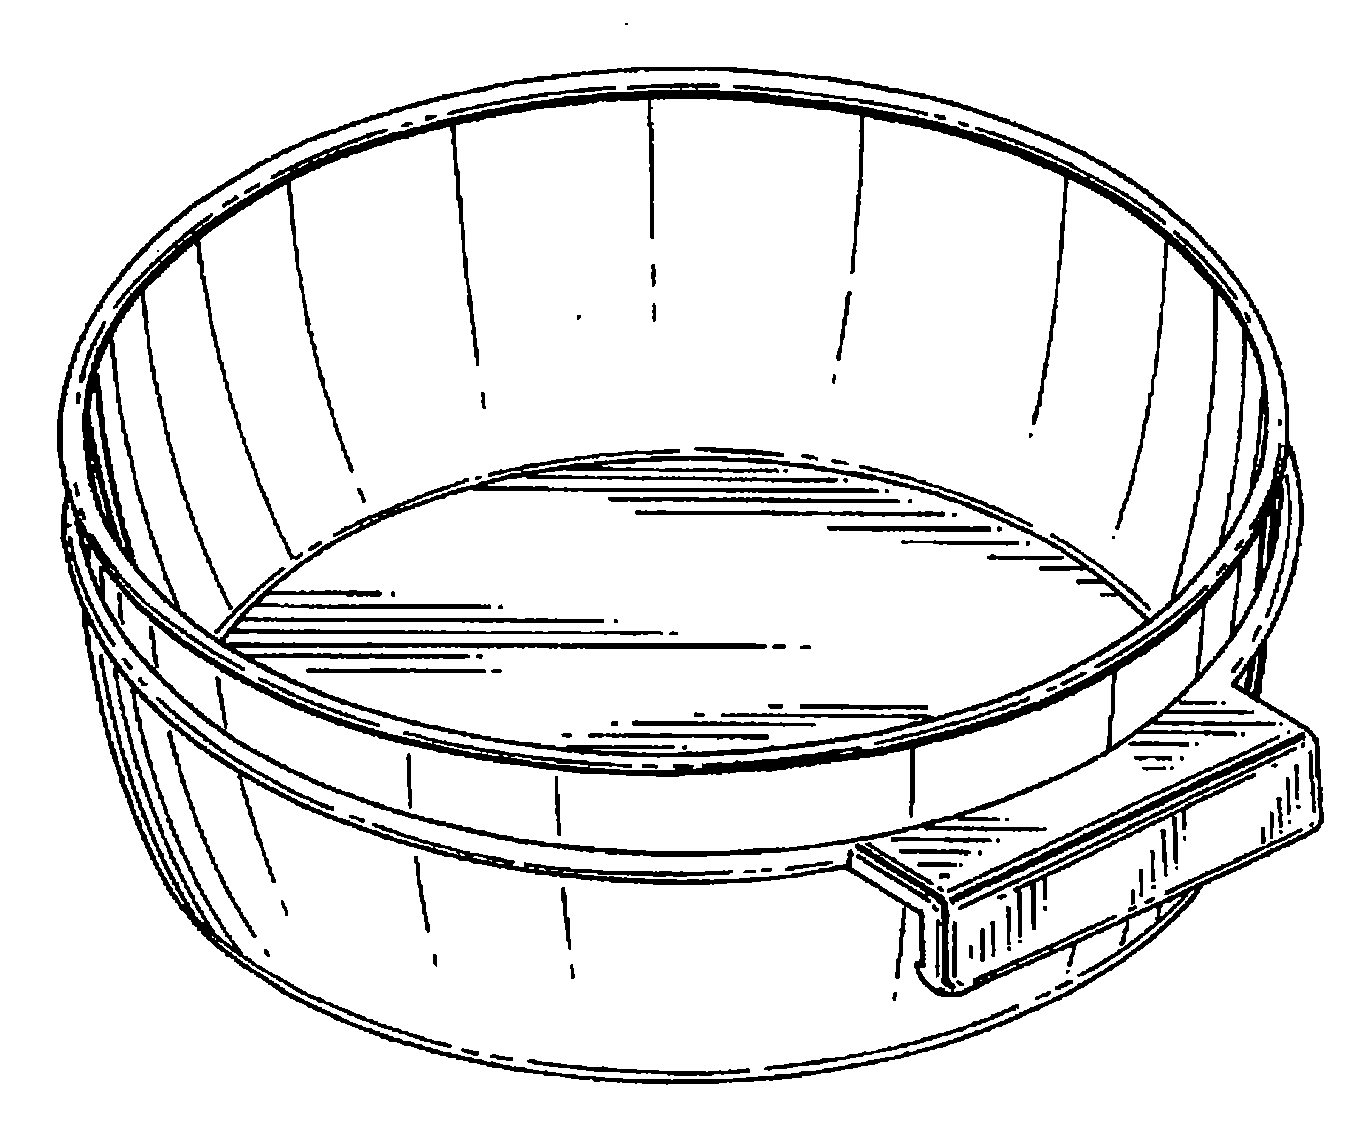 Example of a design for a food server with a handle or fingergrip or carrying flange.
